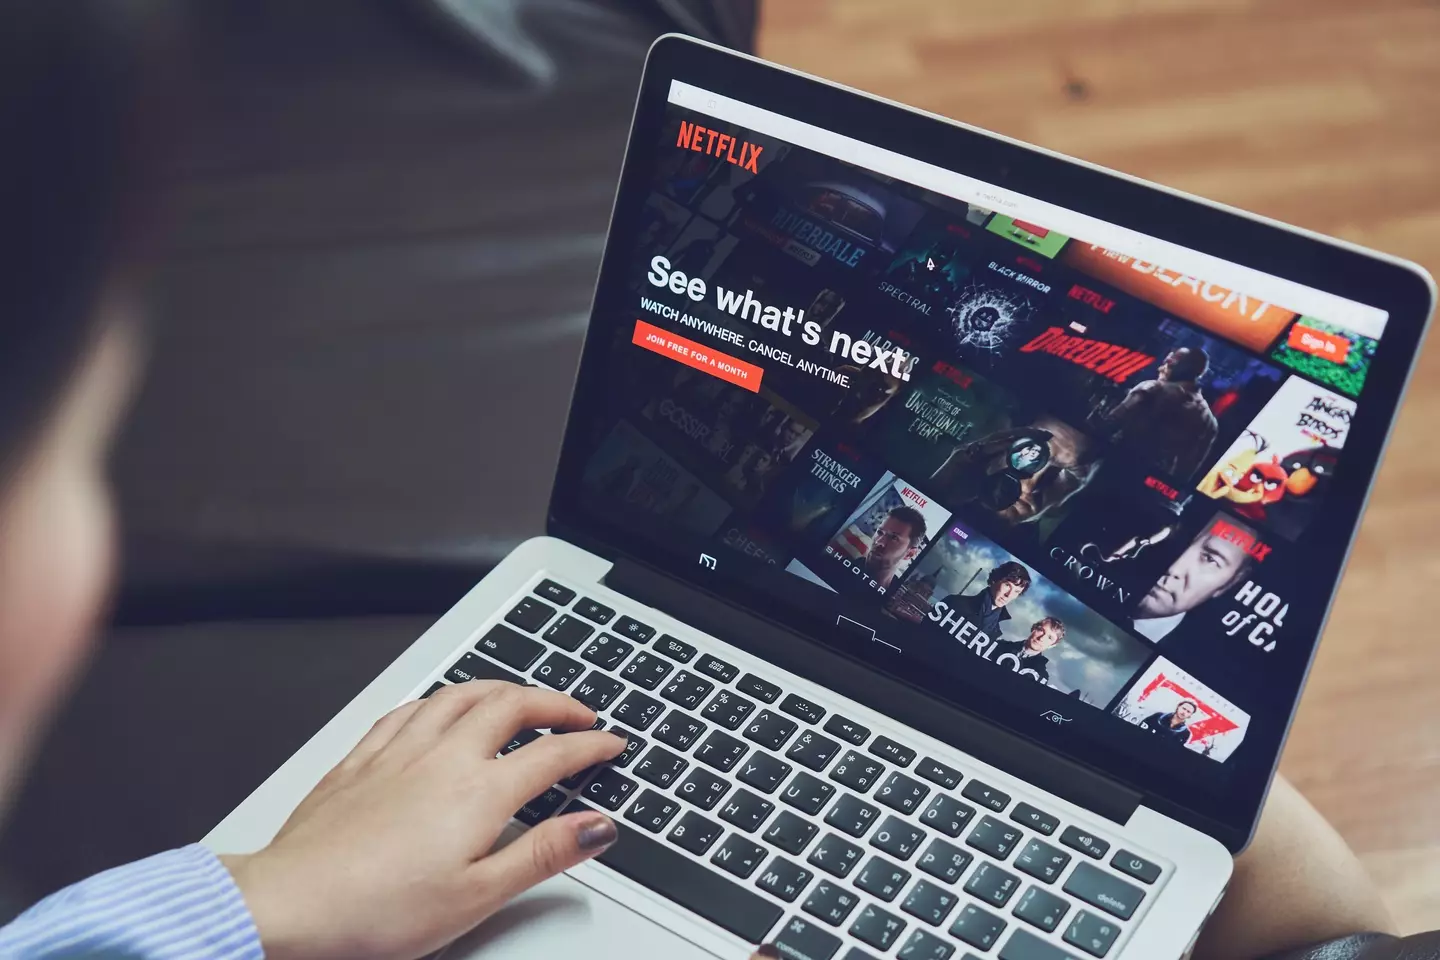 Netflix plans to introduce a cheaper tier of subscription which allows adverts.